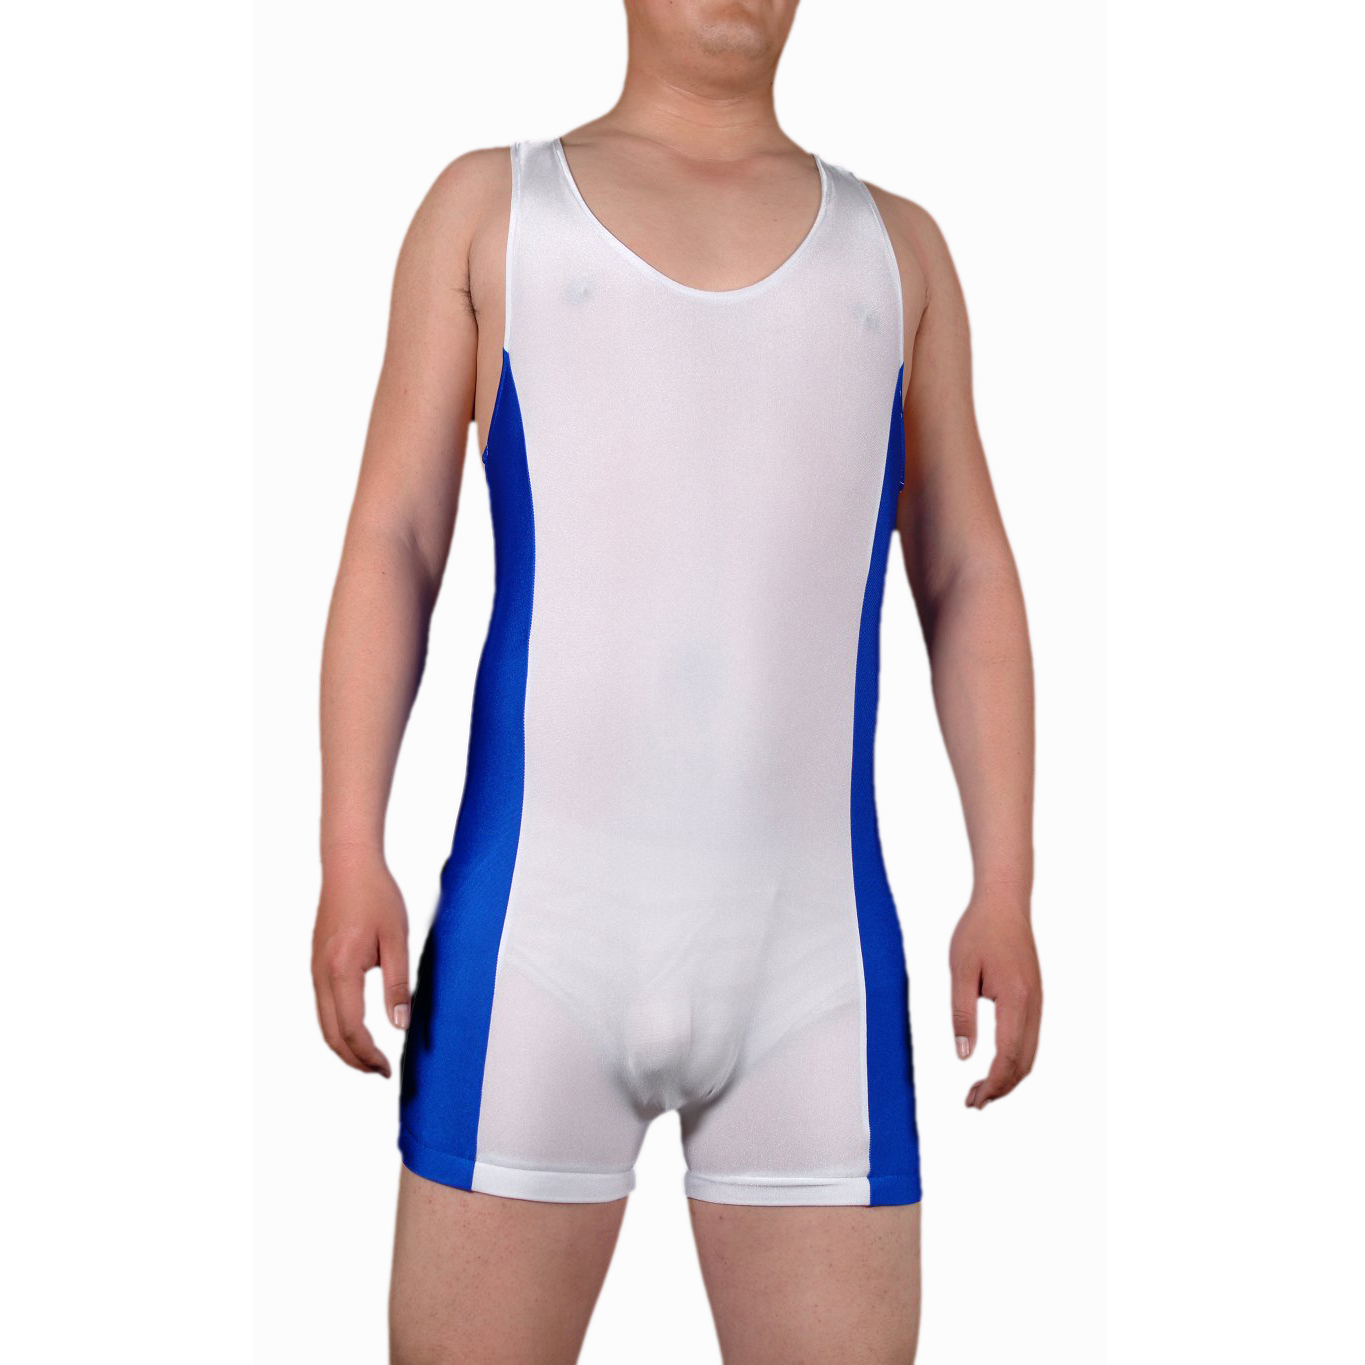 Men's Jumpsuit-styled White with Blue Strips Lycra Spandex Sleev